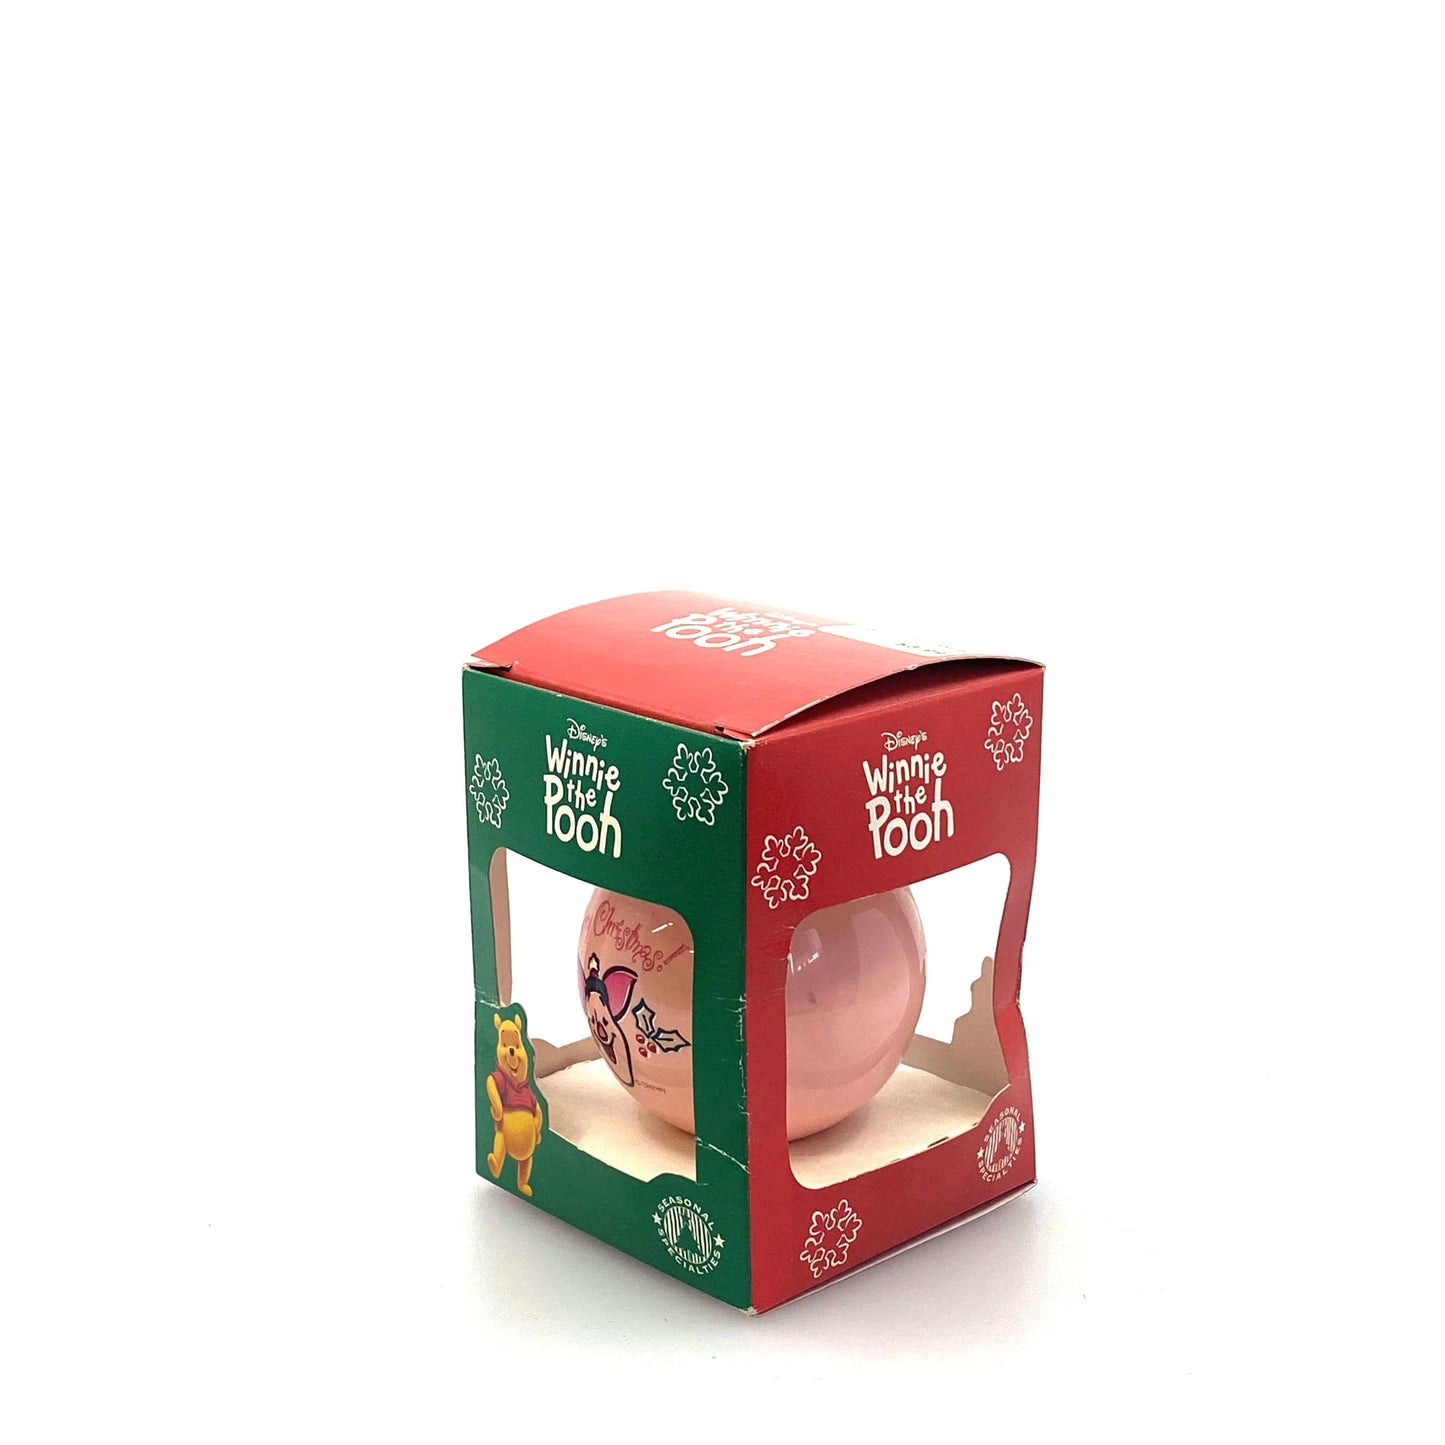 Seasonal Specialties Winne the Pooh “Piglet - Merry Christmas” Holiday Ornament Pink Ball